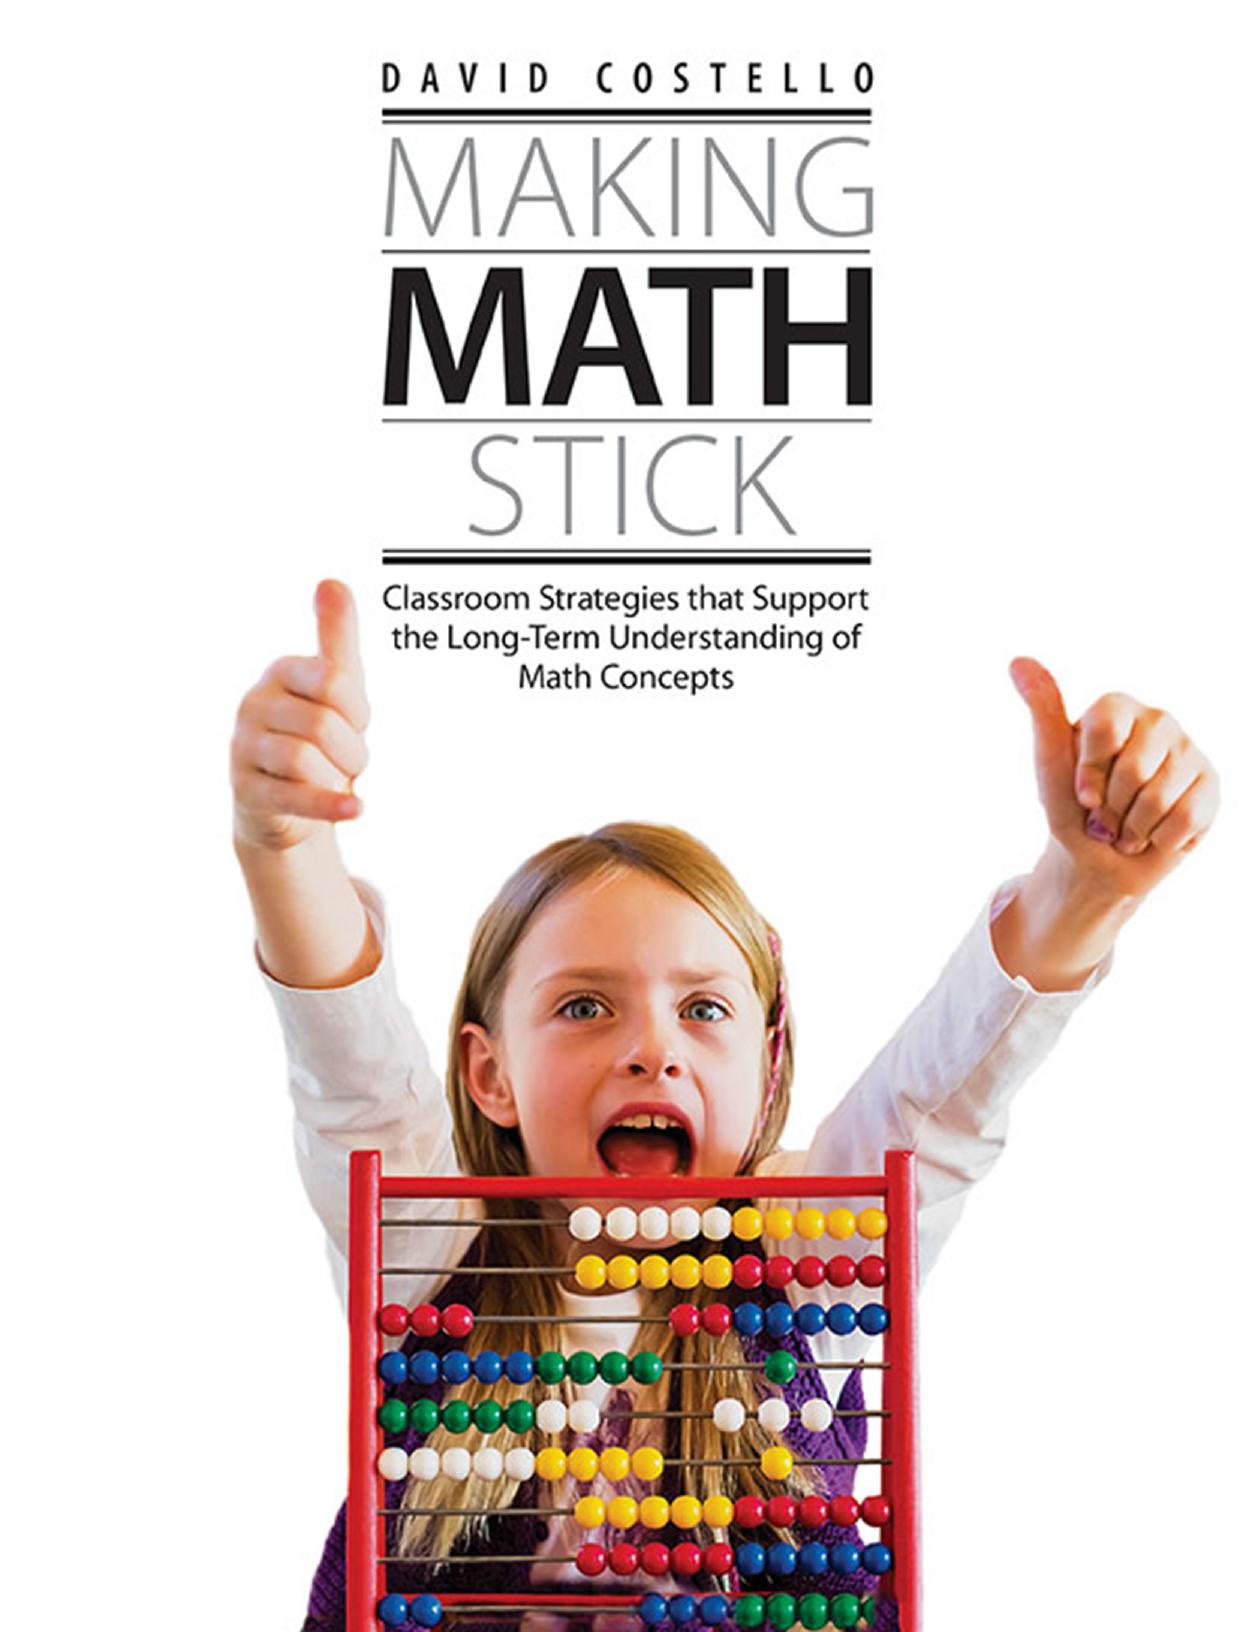 Making Math Stick : Classroom Strategies That Support the Long-Term Understanding of Math Concepts by David Costello